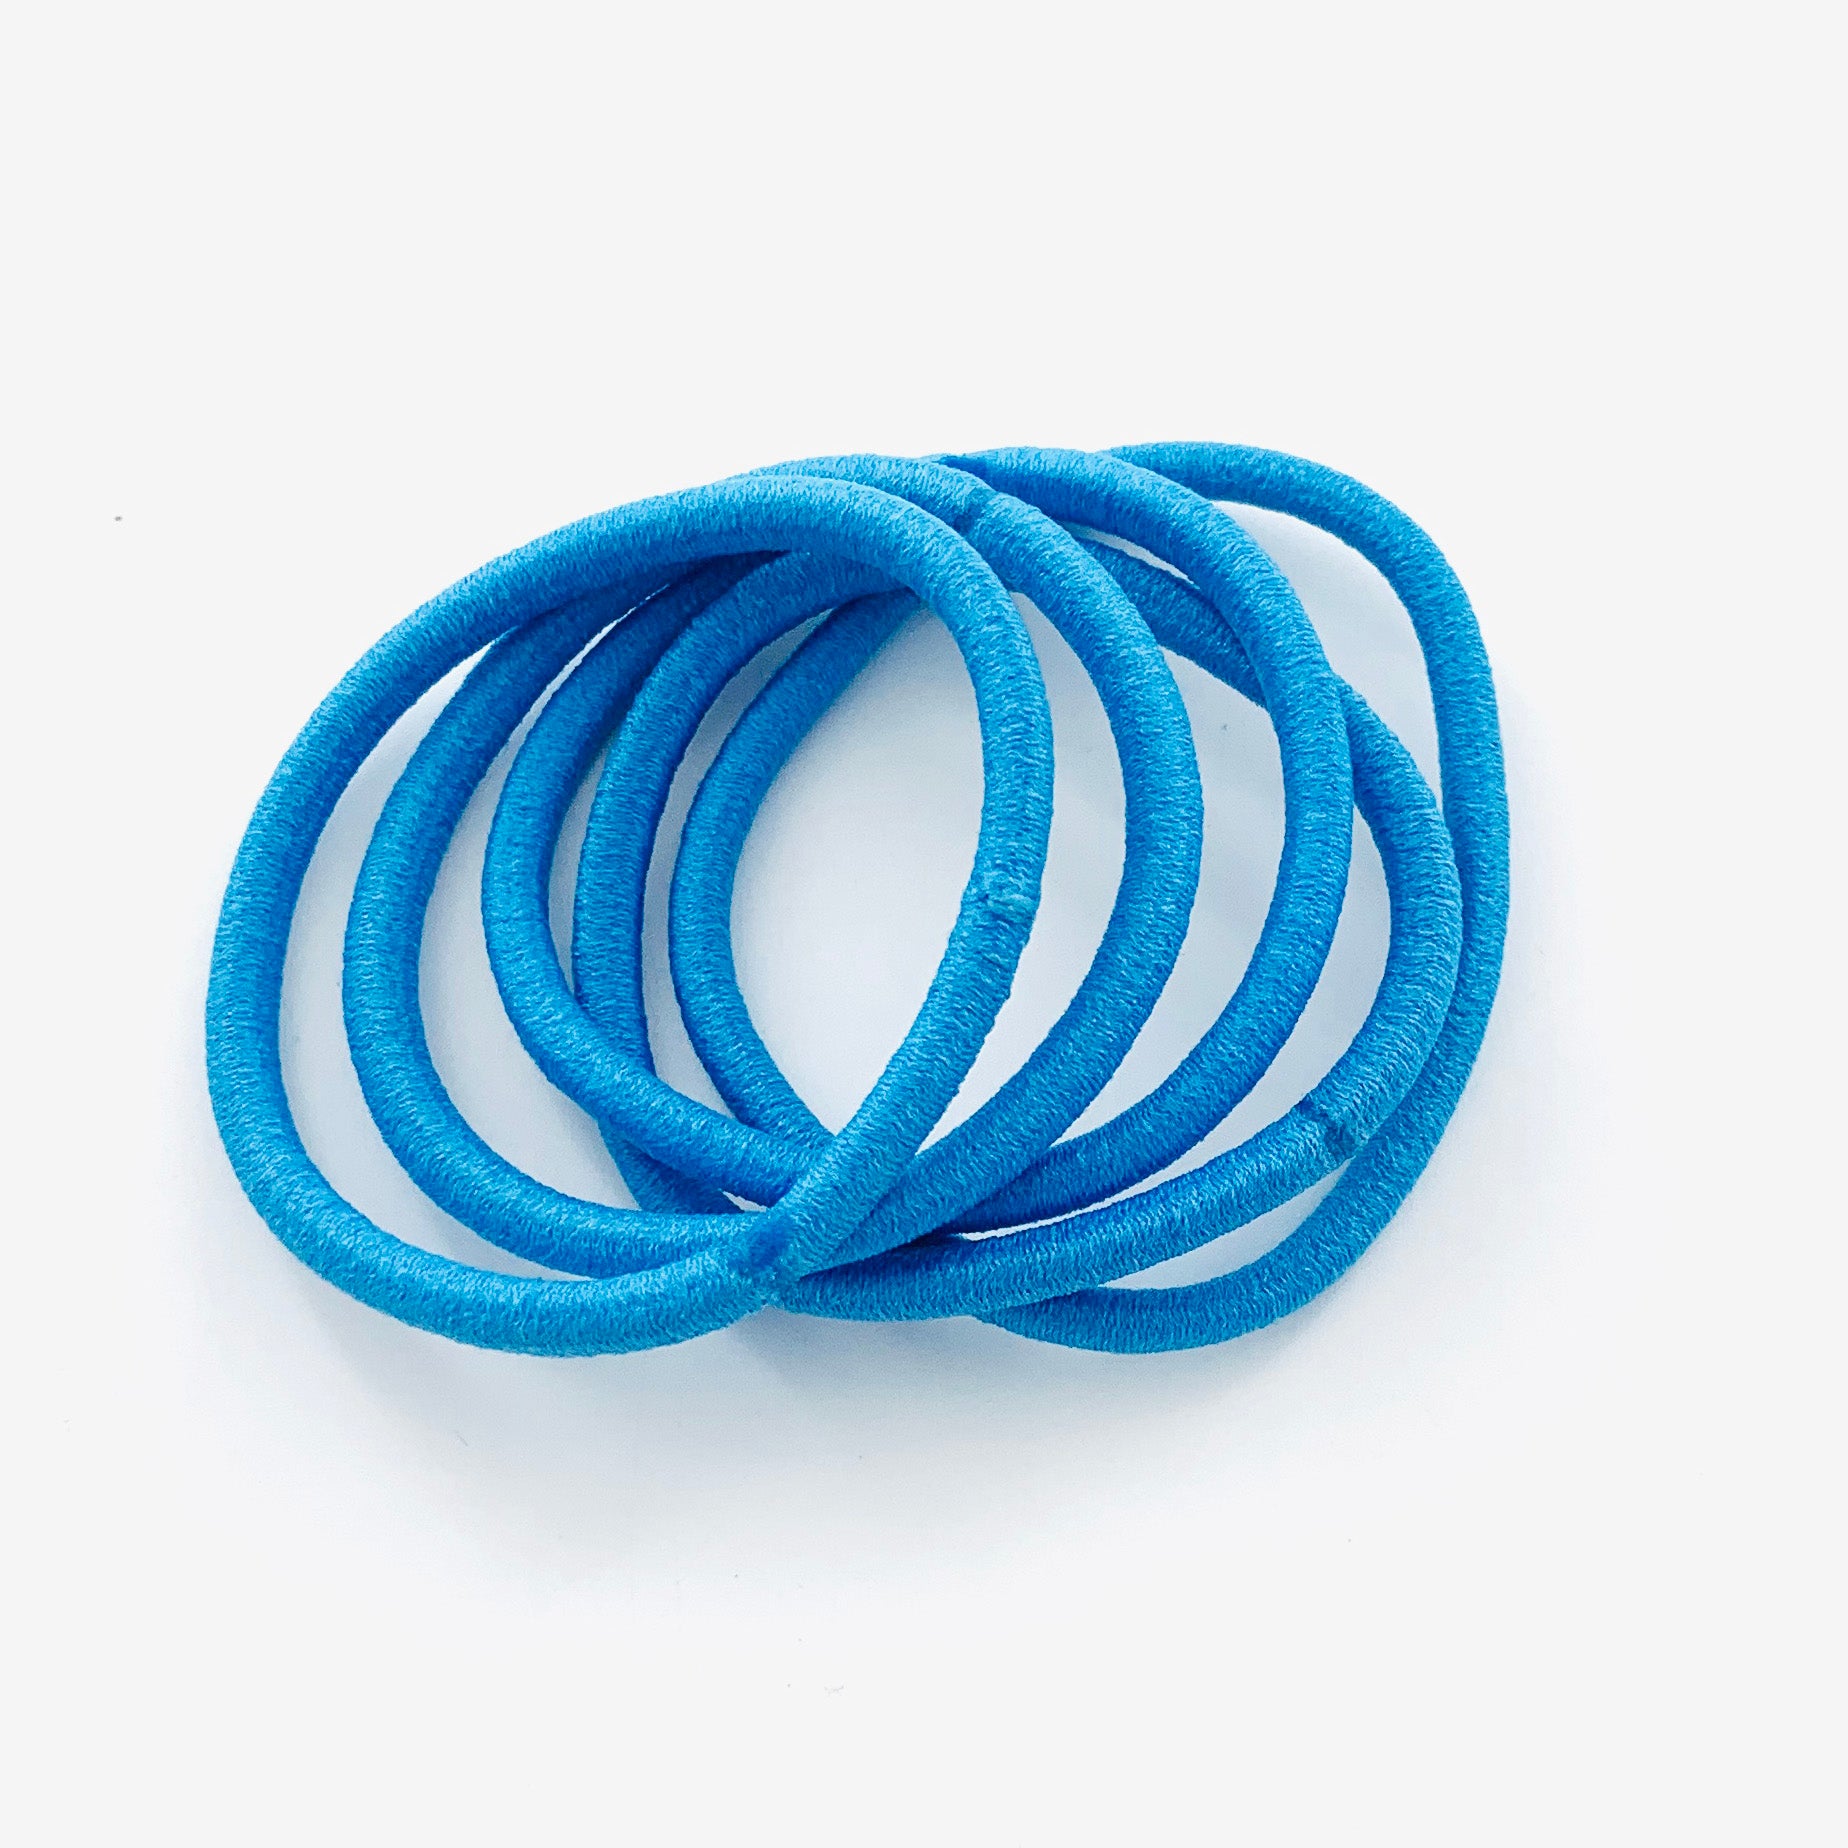 Rubber bands in blue